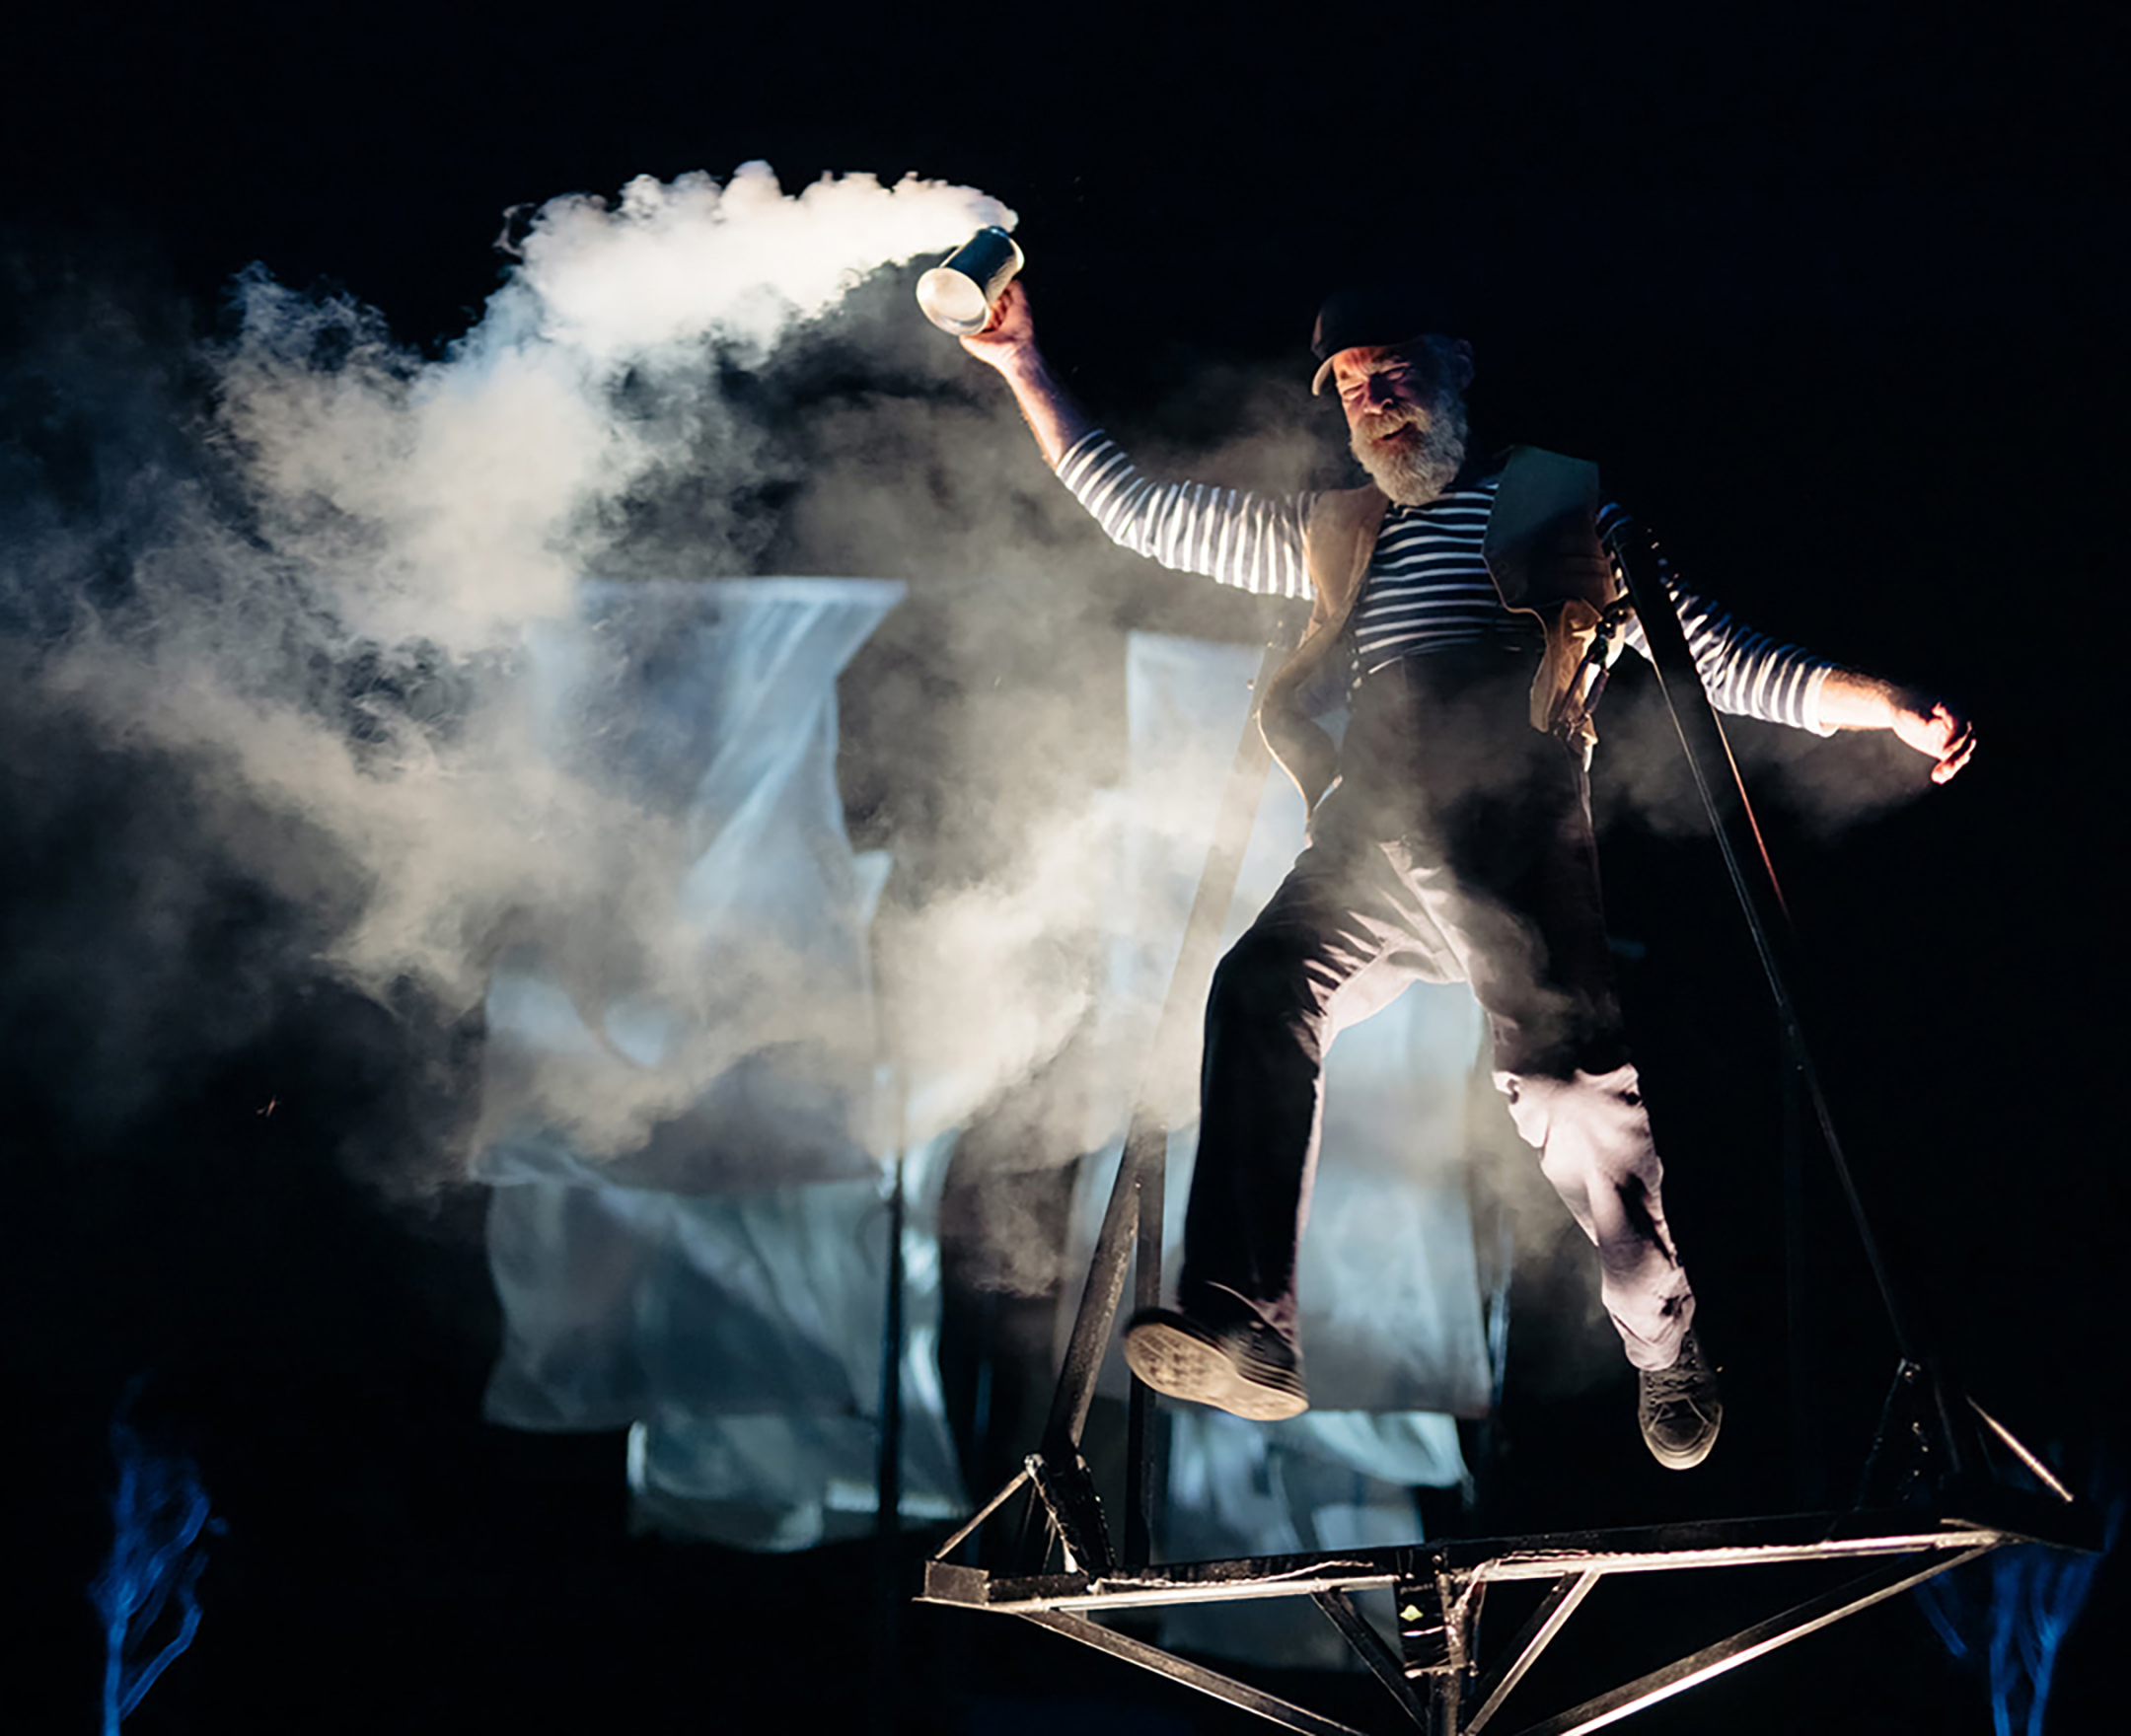 A performer in the sky with smoke